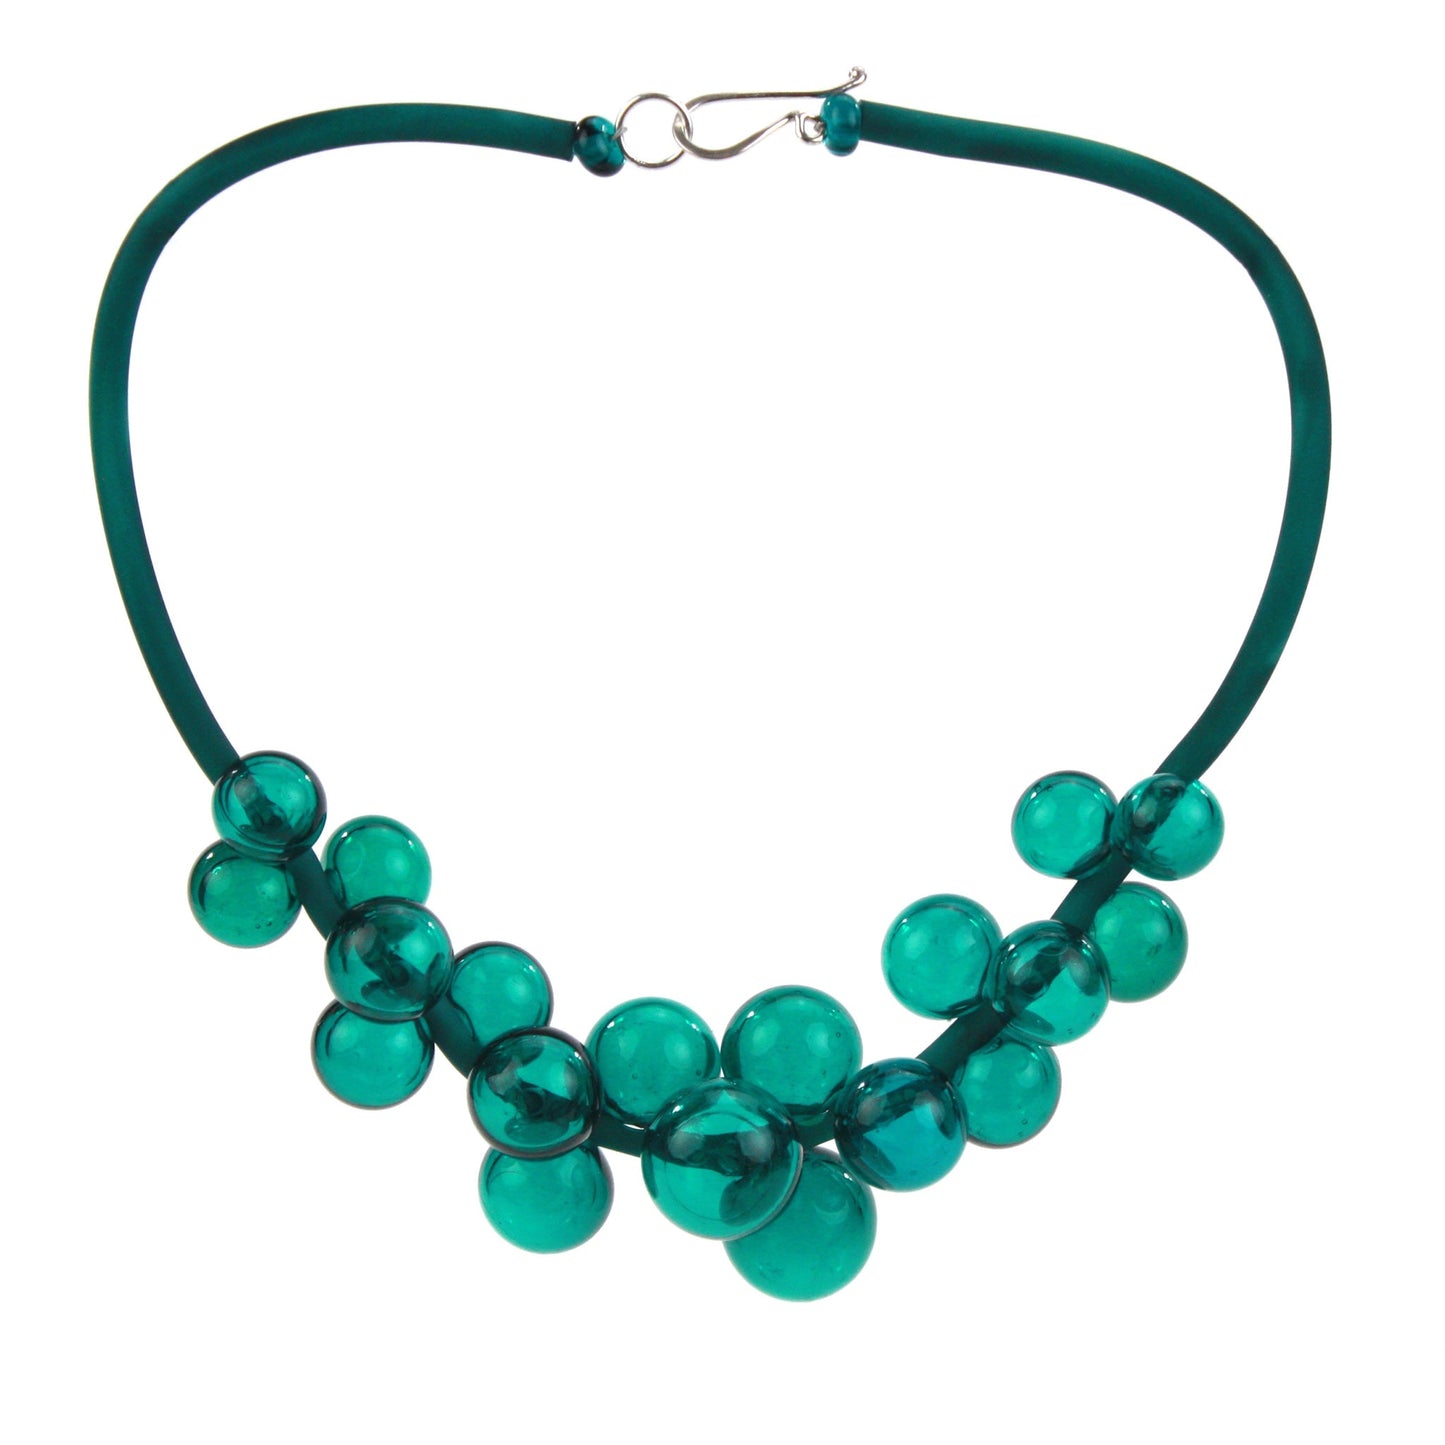 Chroma Bolla Necklace in Teal